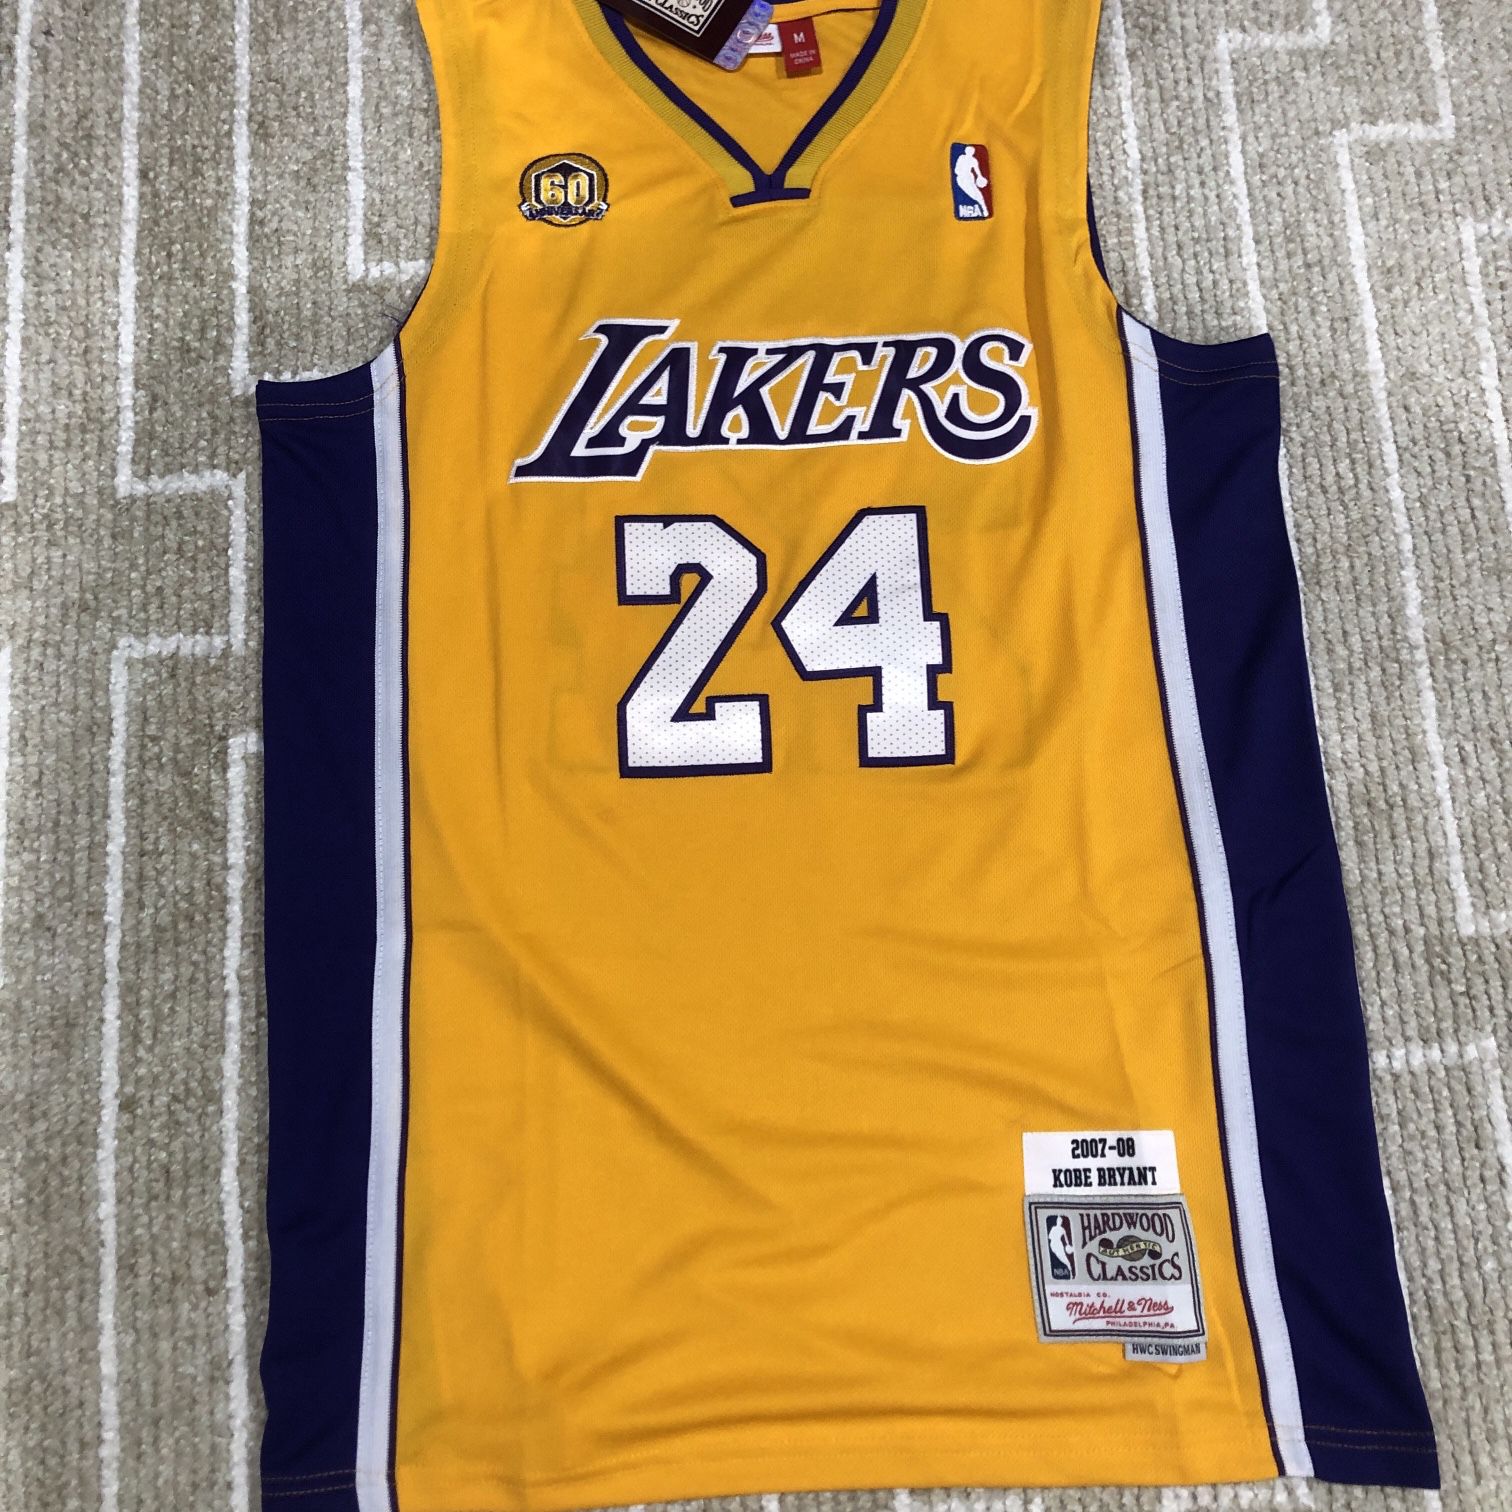 Vintage Champion Kobe Bryant Jersey for Sale in Cypress, CA - OfferUp